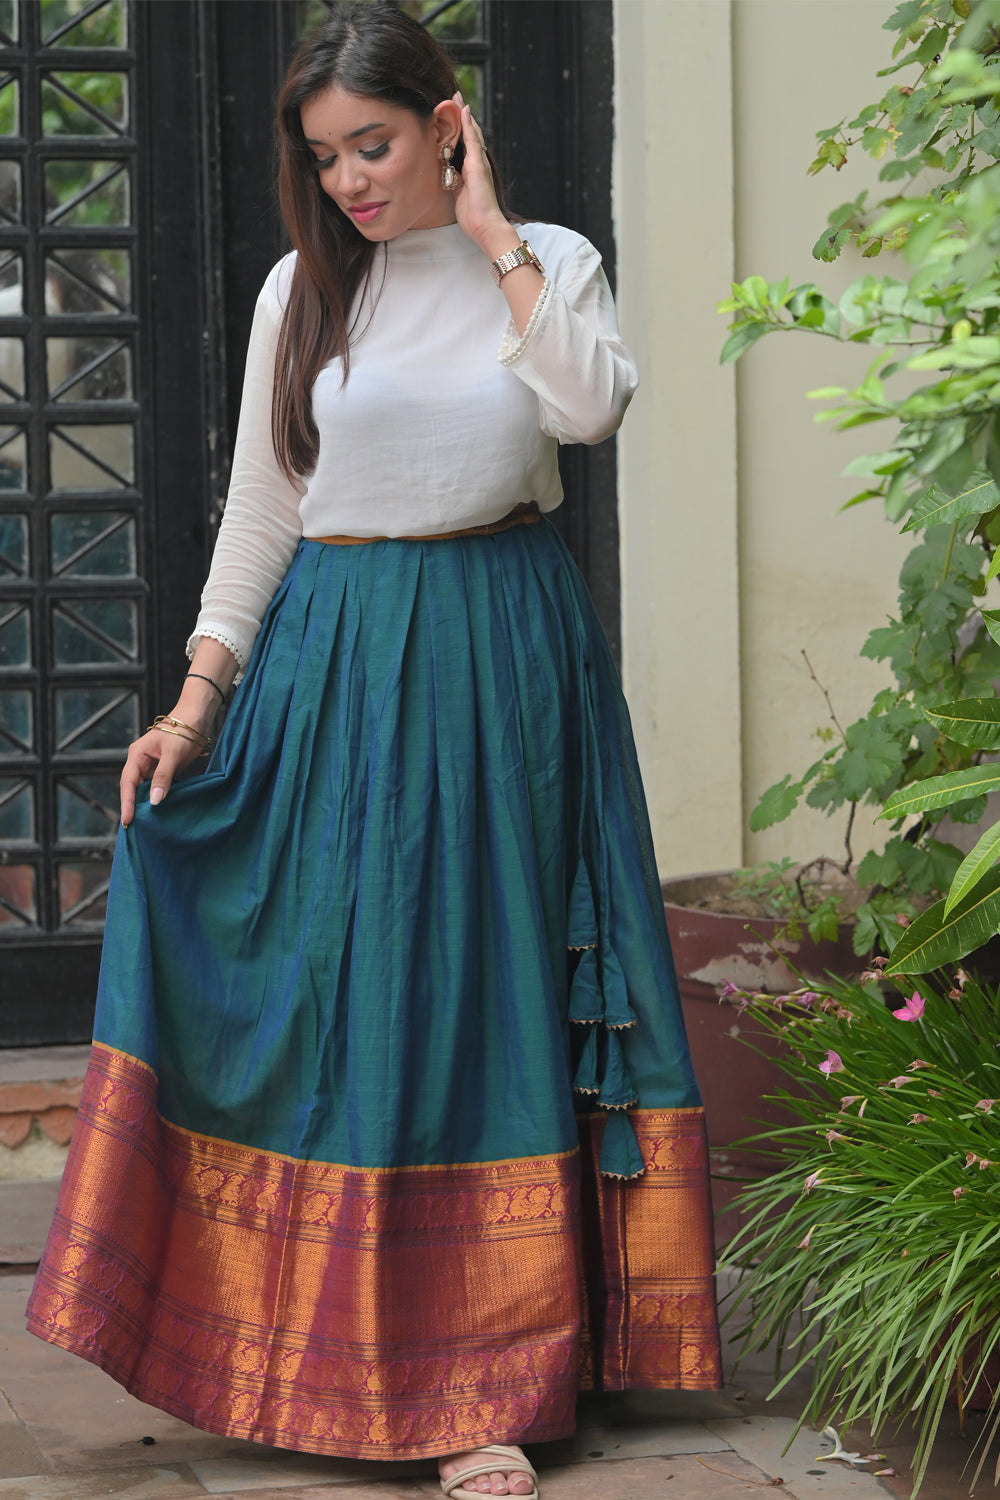 Moor Hues - Peacock Blue Green Pleated skirt with White Georgette Top | Made To Order